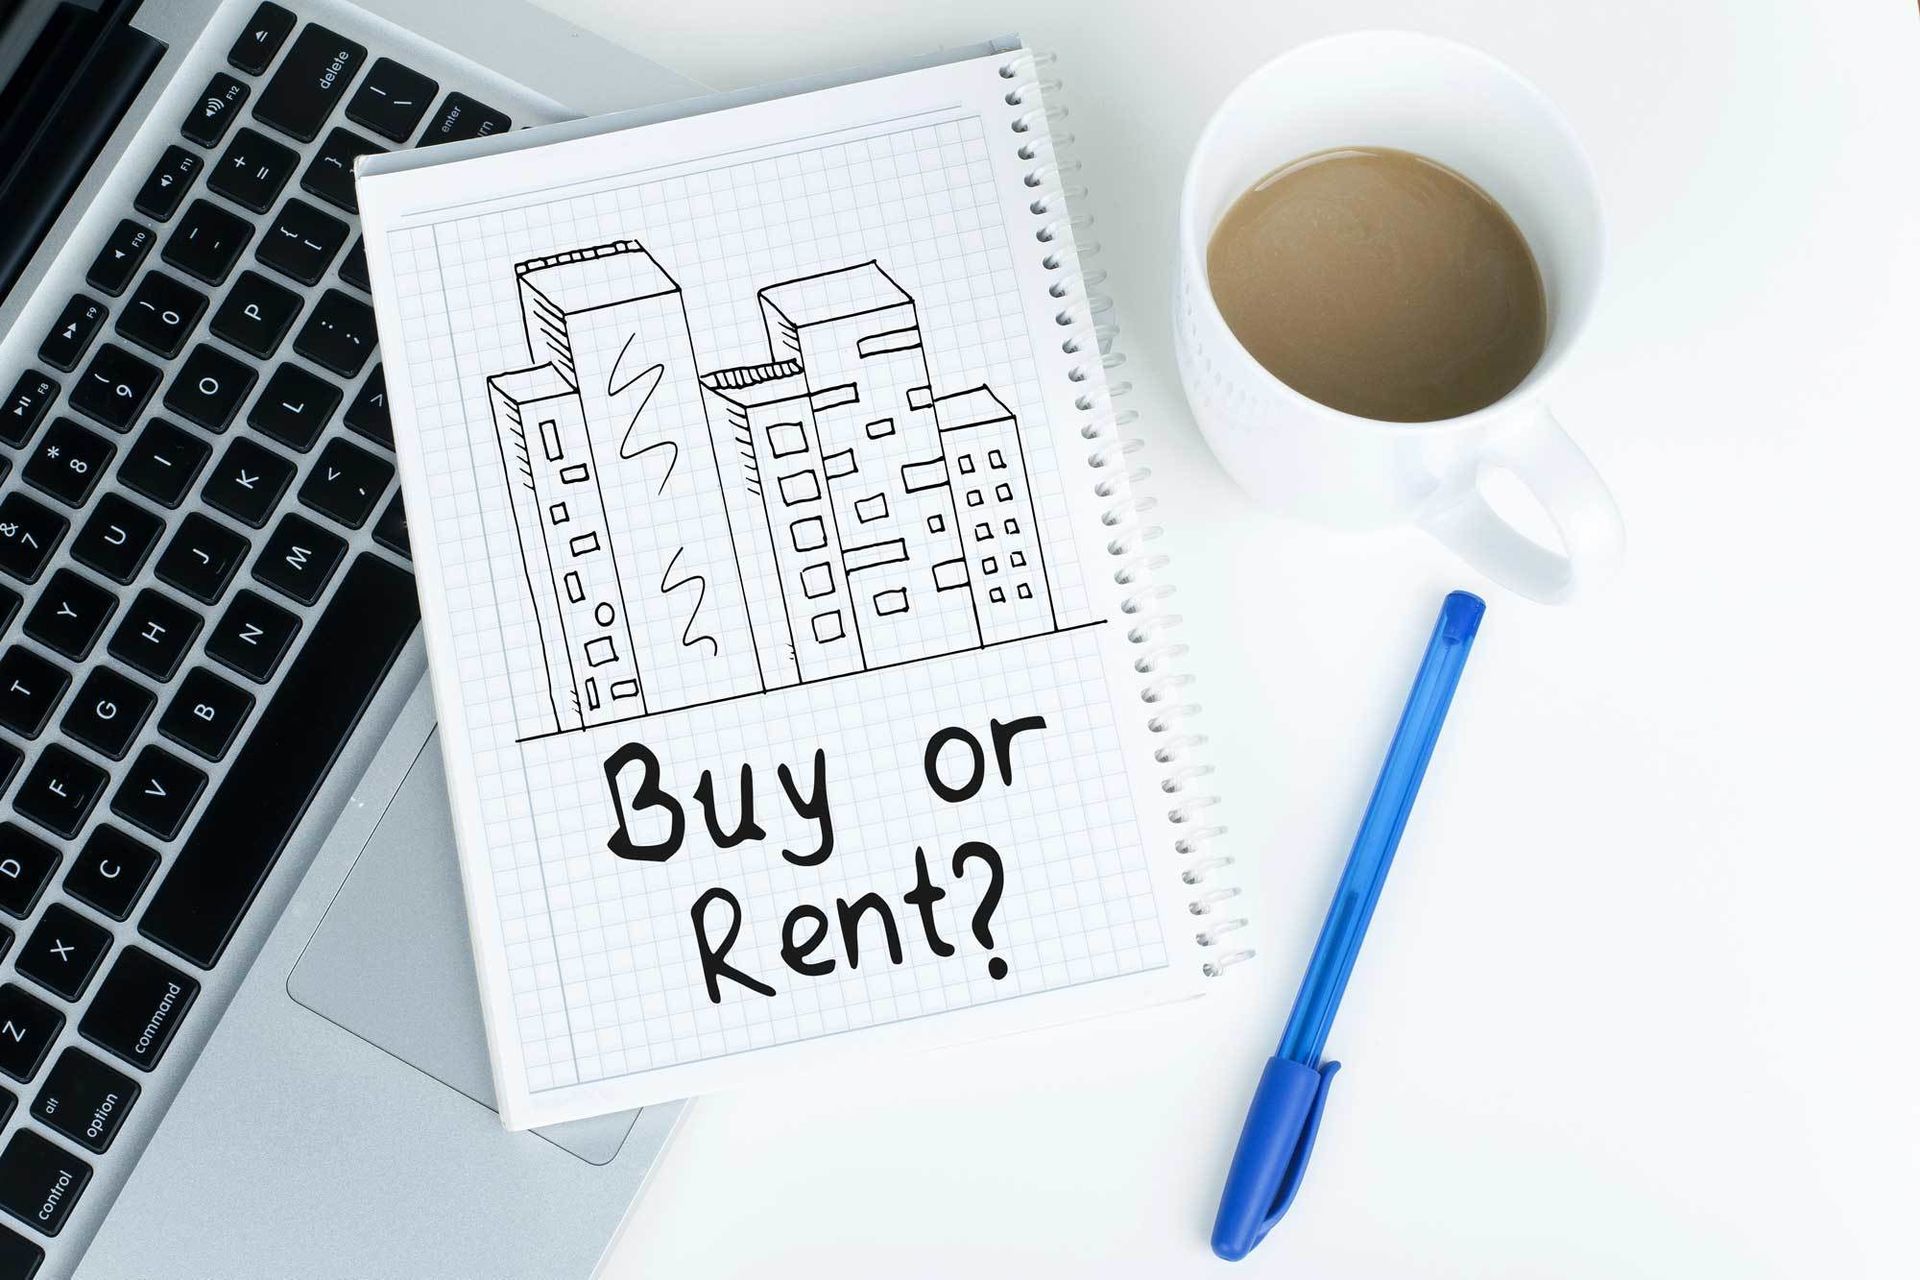 Buy or Rent a home